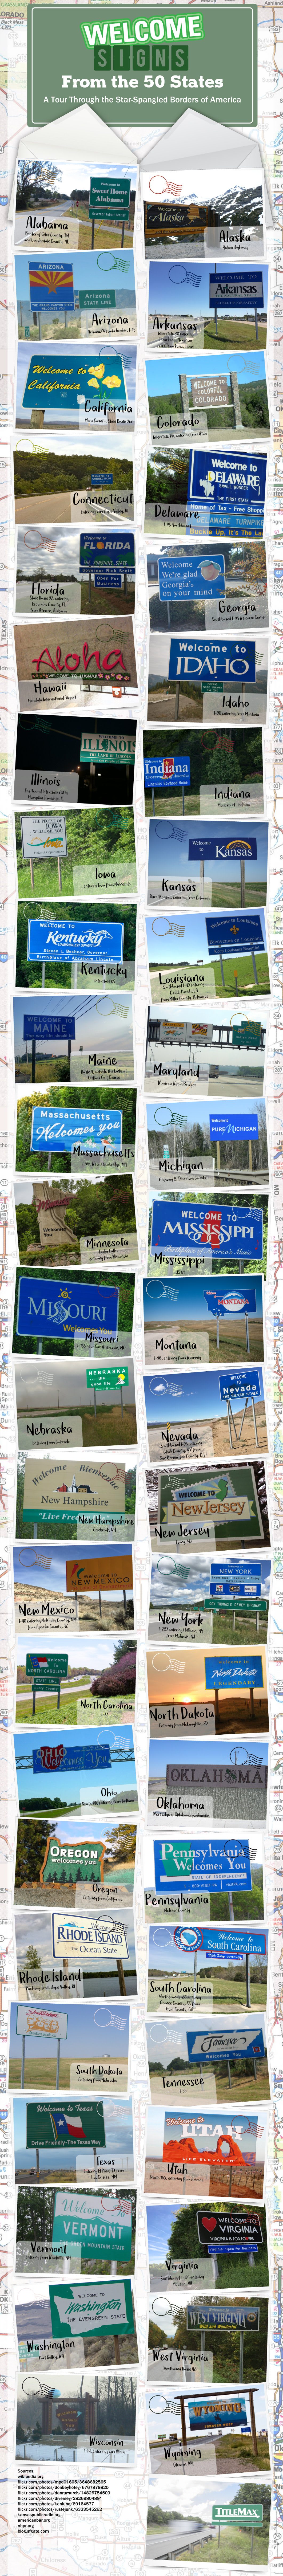 Welcome Signs from the 50 States